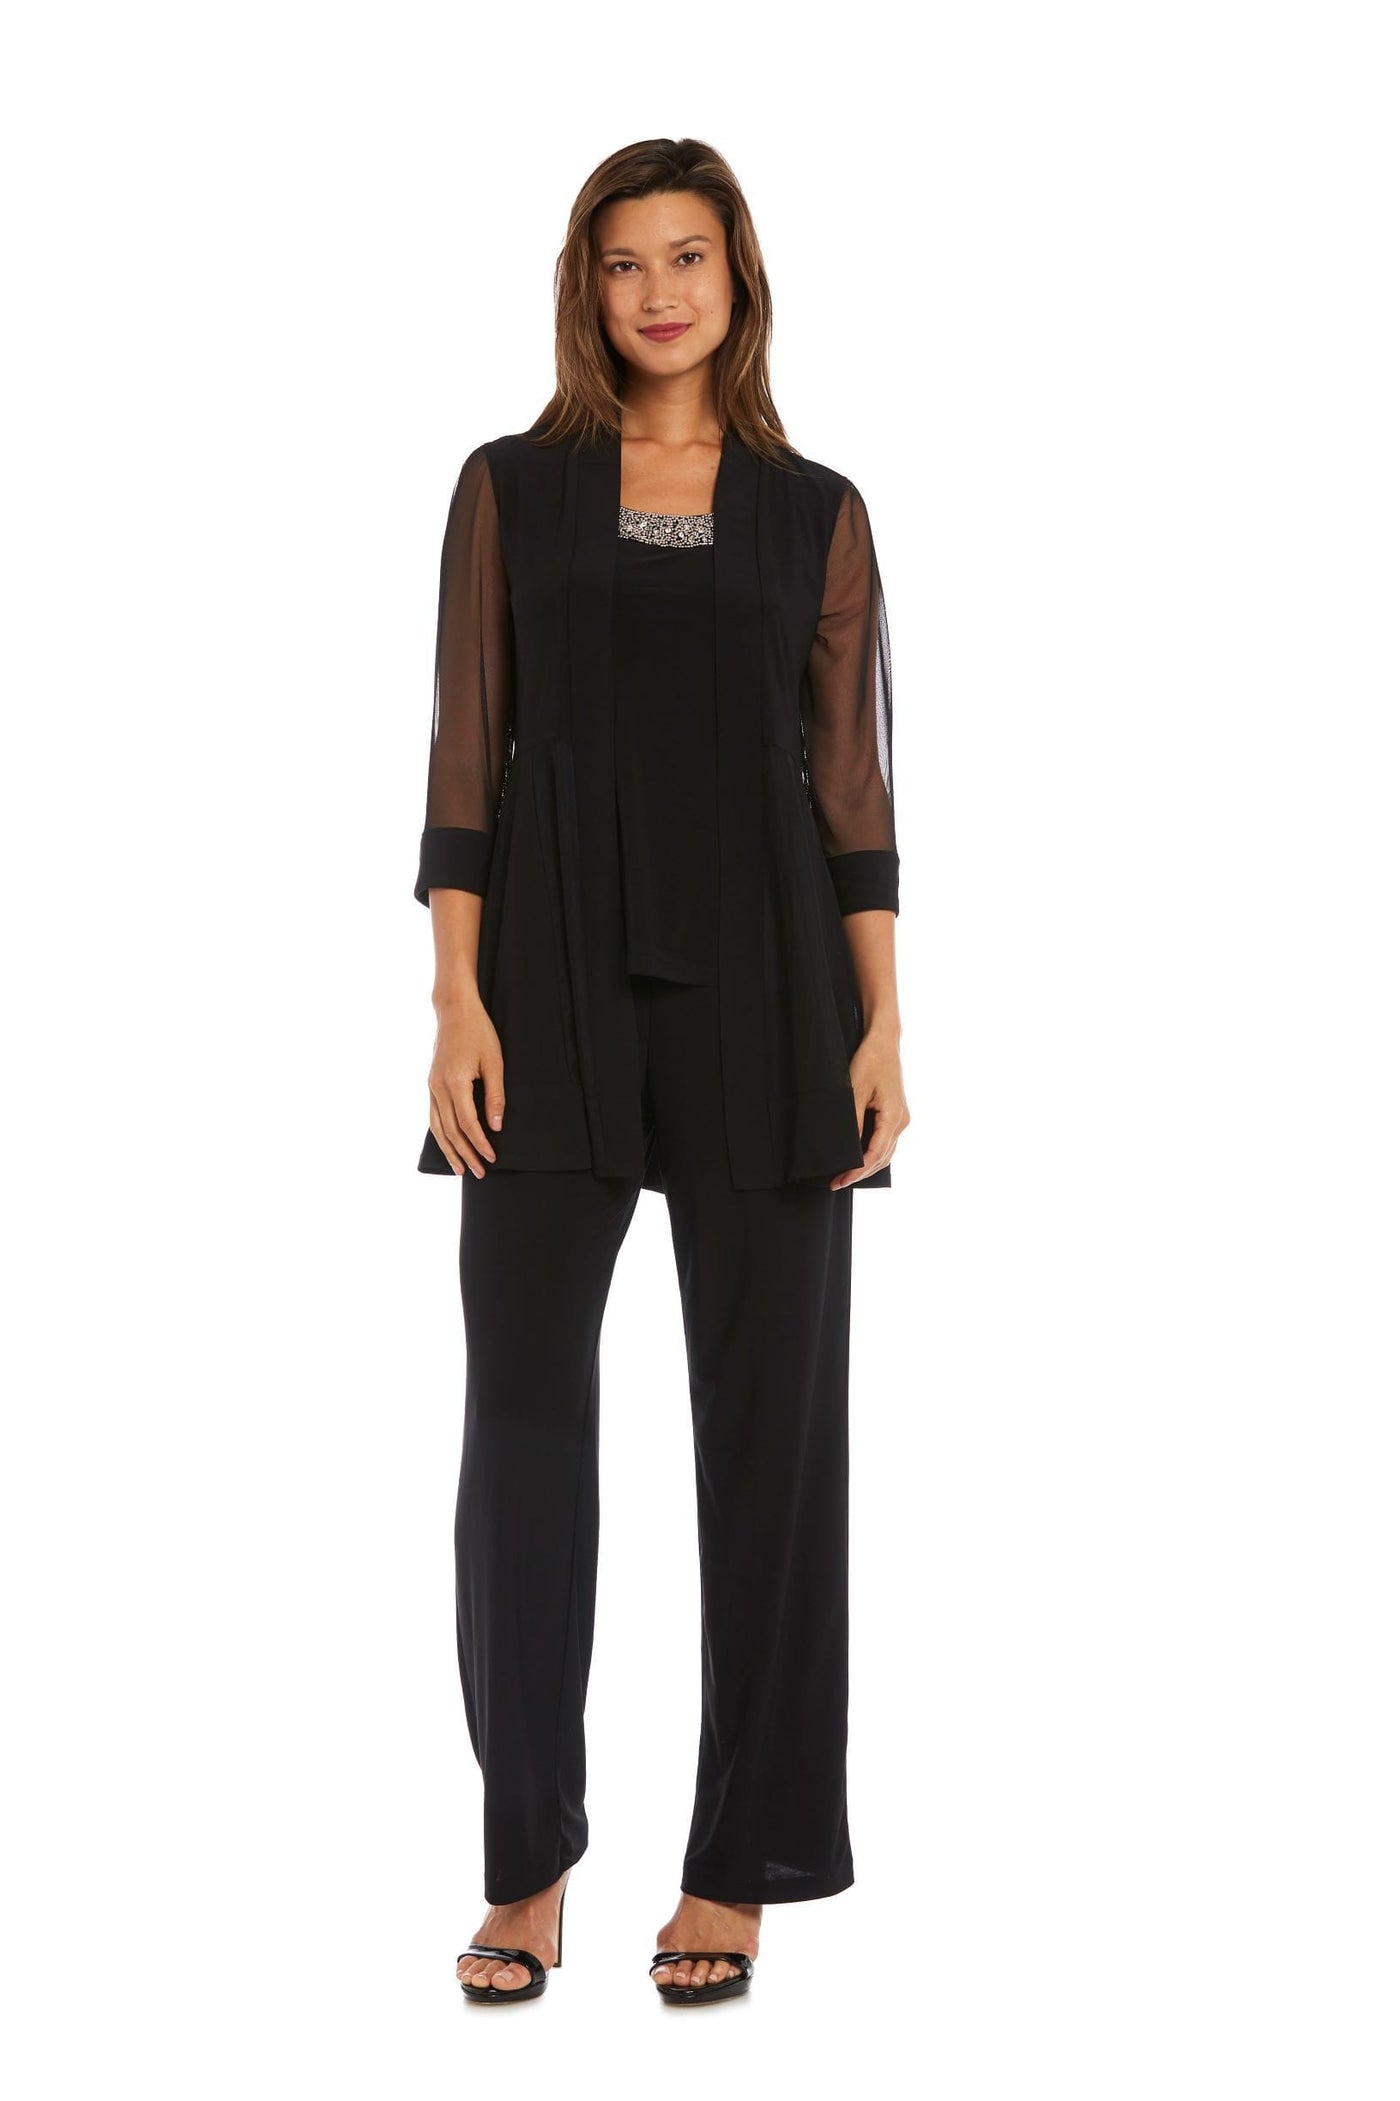 R&M Richards - 8764 Faux Three-Piece Pant Suit with Sheer Inserts and Embellishments